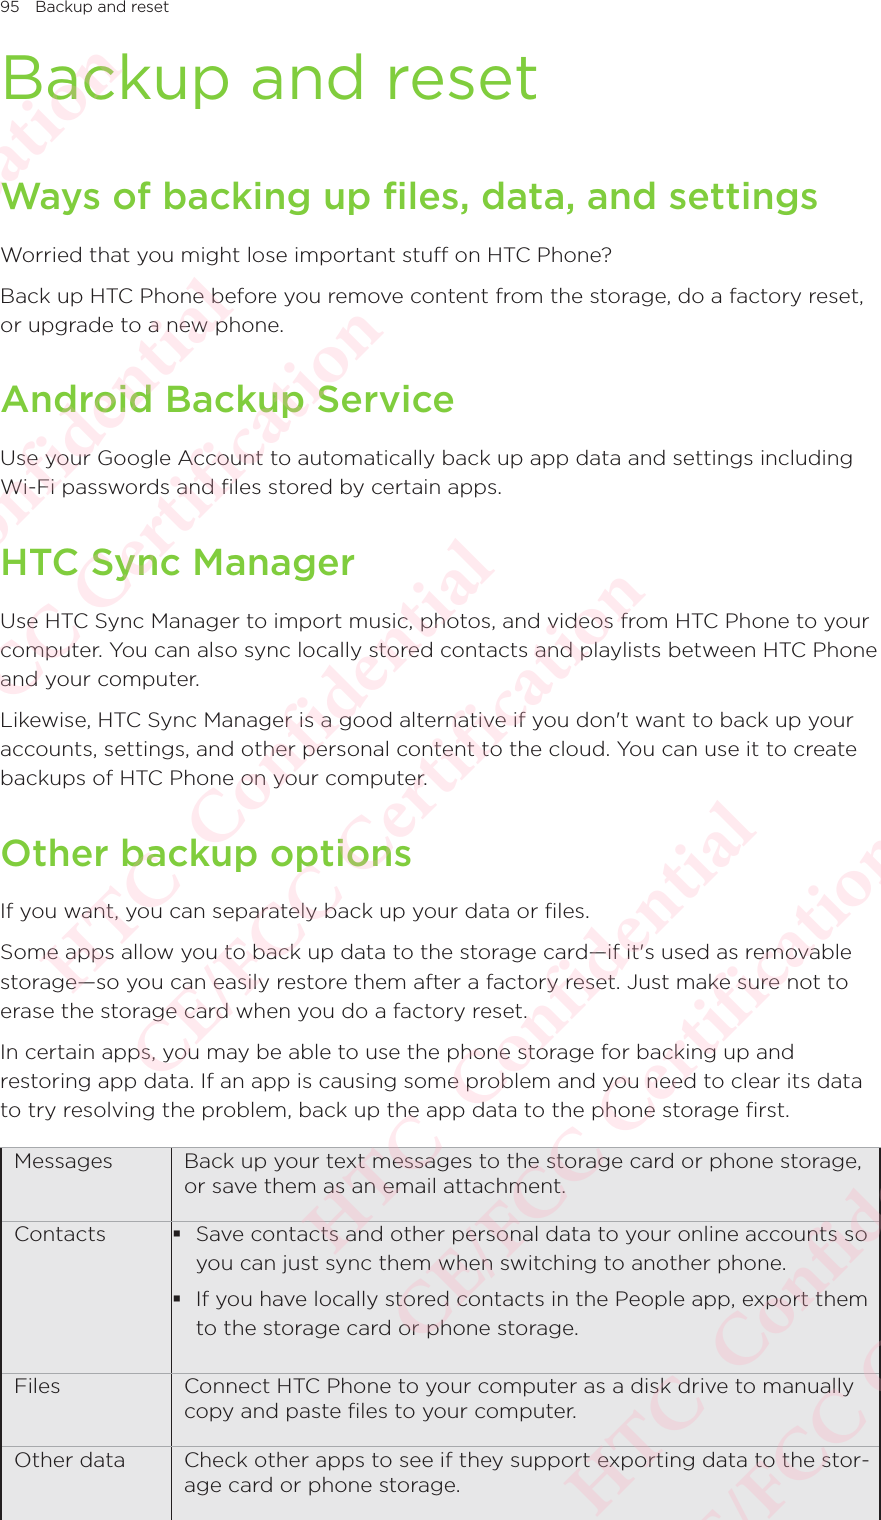 95 Backup and resetBackup and resetWays of backing up files, data, and settingsWorried that you might lose important stuff on HTC Phone? Back up HTC Phone before you remove content from the storage, do a factory reset, or upgrade to a new phone. Android Backup ServiceUse your Google Account to automatically back up app data and settings including Wi-Fi passwords and files stored by certain apps.HTC Sync ManagerUse HTC Sync Manager to import music, photos, and videos from HTC Phone to your computer. You can also sync locally stored contacts and playlists between HTC Phone and your computer. Likewise, HTC Sync Manager is a good alternative if you don&apos;t want to back up your accounts, settings, and other personal content to the cloud. You can use it to create backups of HTC Phone on your computer. Other backup optionsIf you want, you can separately back up your data or files. Some apps allow you to back up data to the storage card—if it&apos;s used as removable storage—so you can easily restore them after a factory reset. Just make sure not to erase the storage card when you do a factory reset. In certain apps, you may be able to use the phone storage for backing up and restoring app data. If an app is causing some problem and you need to clear its data to try resolving the problem, back up the app data to the phone storage first. Messages Back up your text messages to the storage card or phone storage, or save them as an email attachment. Contacts   Save contacts and other personal data to your online accounts so you can just sync them when switching to another phone.  If you have locally stored contacts in the People app, export them to the storage card or phone storage. Files Connect HTC Phone to your computer as a disk drive to manually copy and paste ﬁles to your computer. Other data Check other apps to see if they support exporting data to the stor-age card or phone storage. HTC  Confidential CE/FCC Certification  HTC  Confidential CE/FCC Certification  HTC  Confidential CE/FCC Certification  HTC  Confidential CE/FCC Certification  HTC  Confidential CE/FCC Certification 